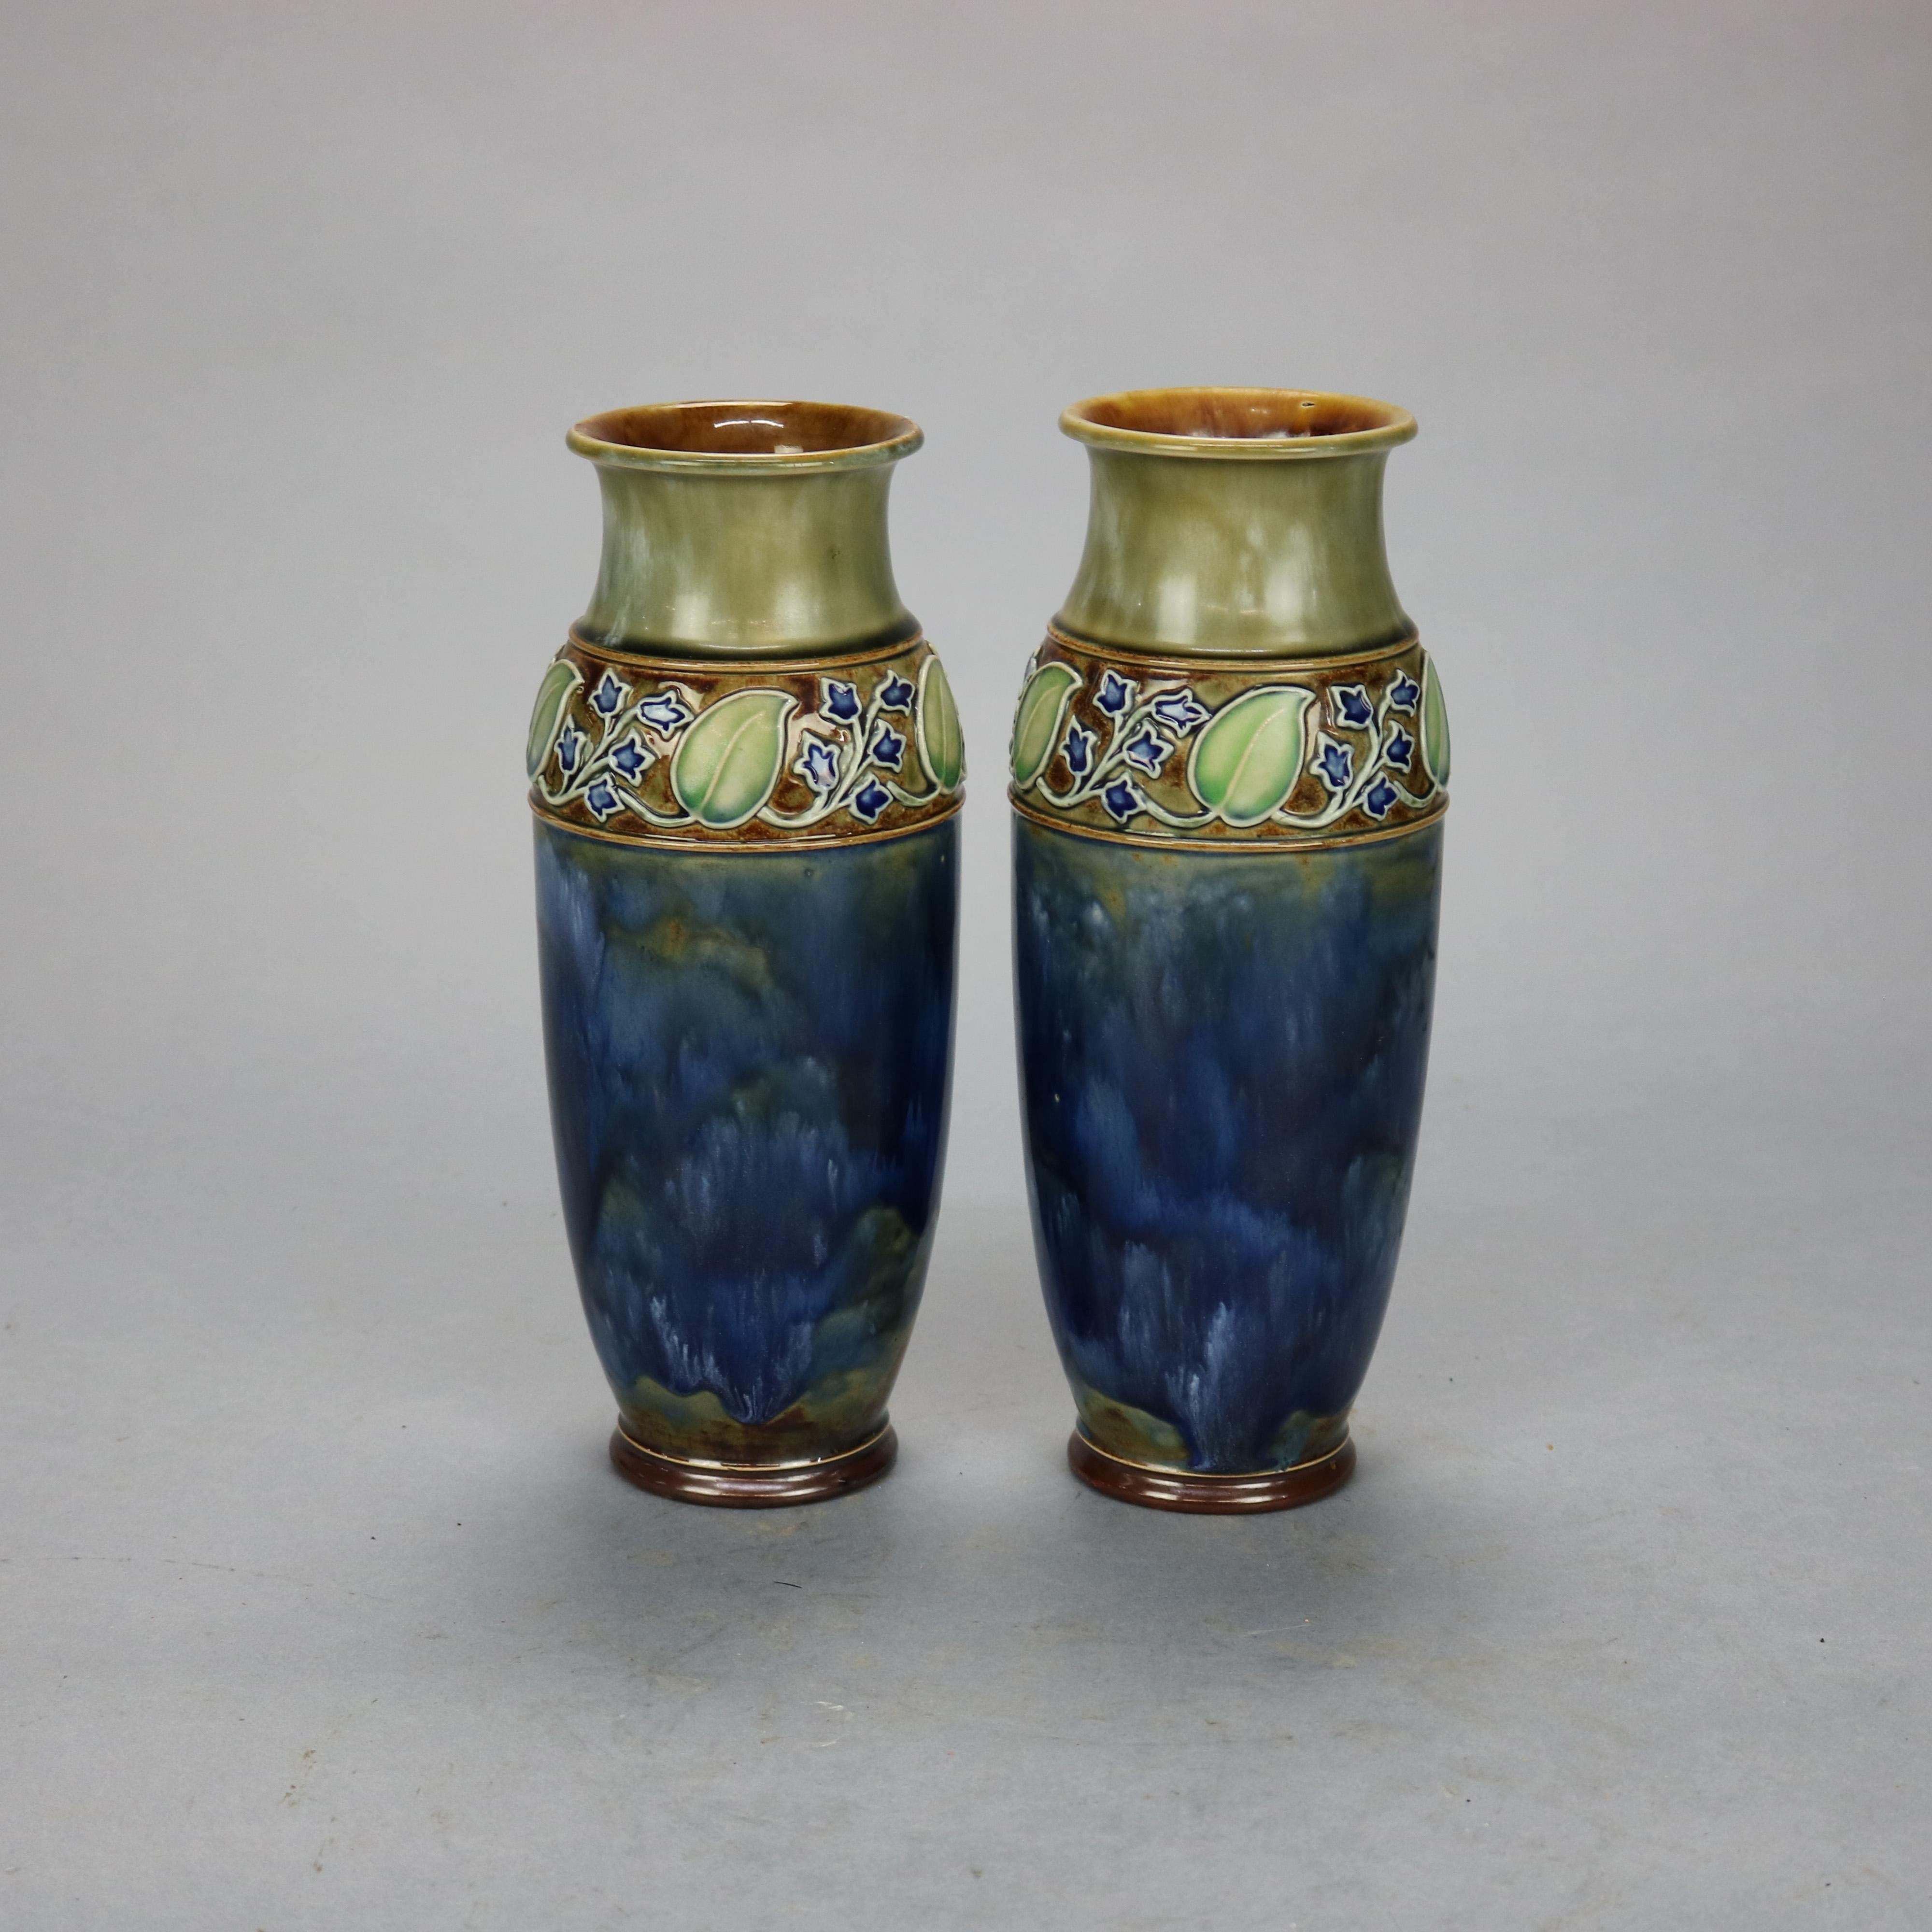 Arts and Crafts Antique Pair of Royal Doulton Arts & Crafts Pottery Vases, Circa 1910